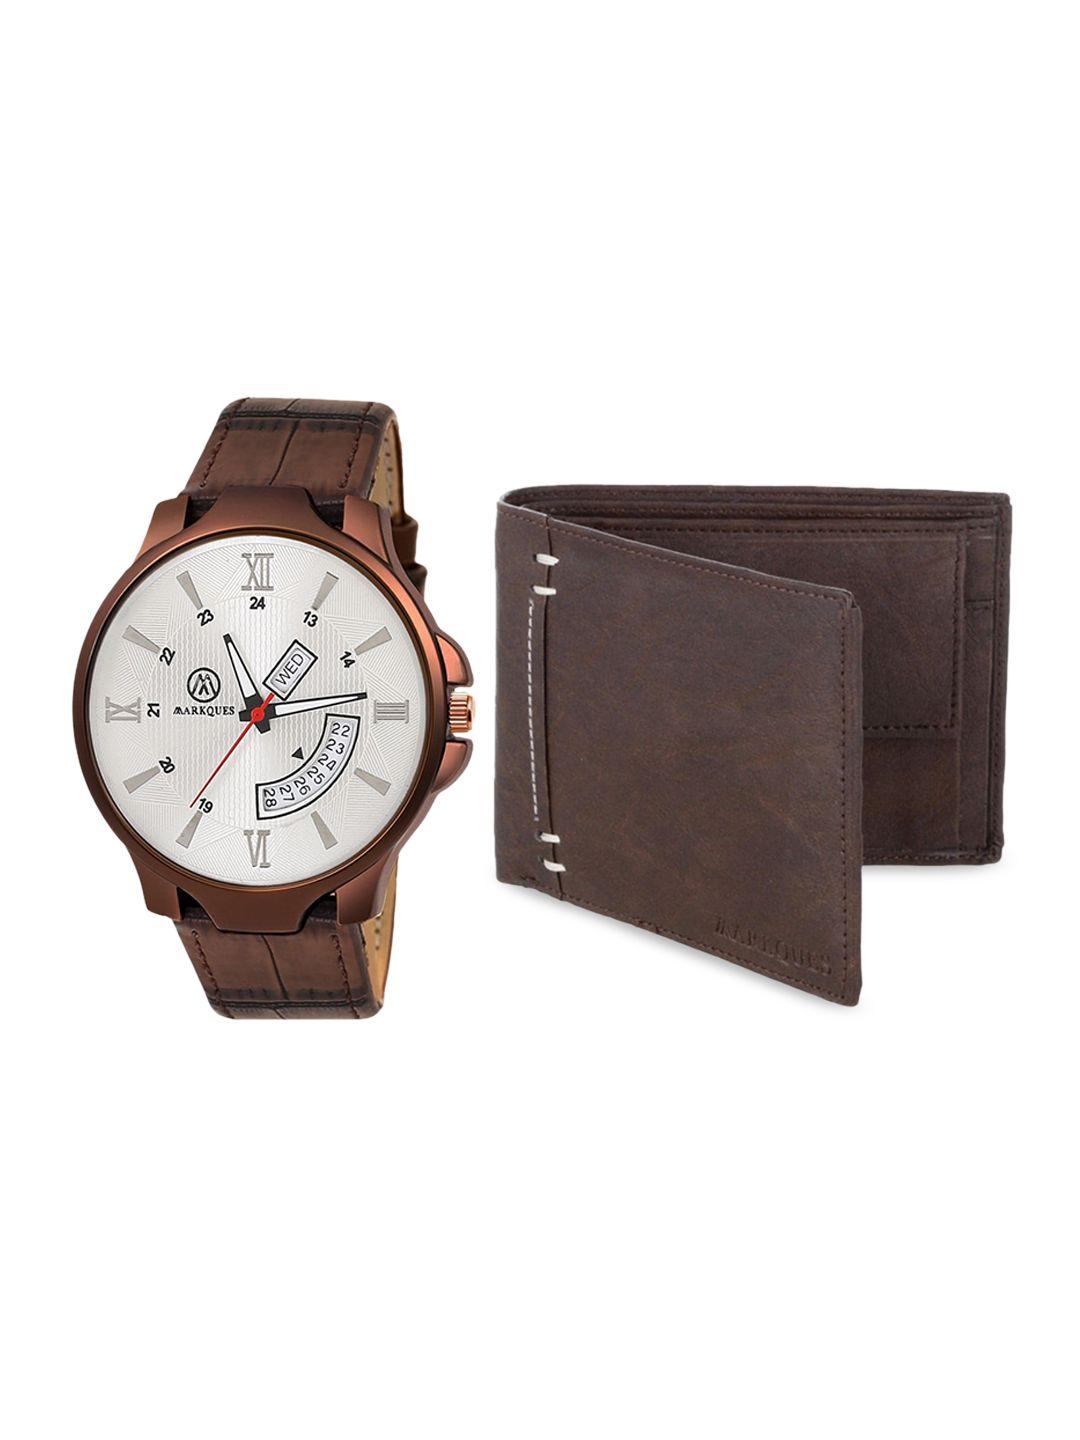 markques men brown watch and wallet combo accessory gift set